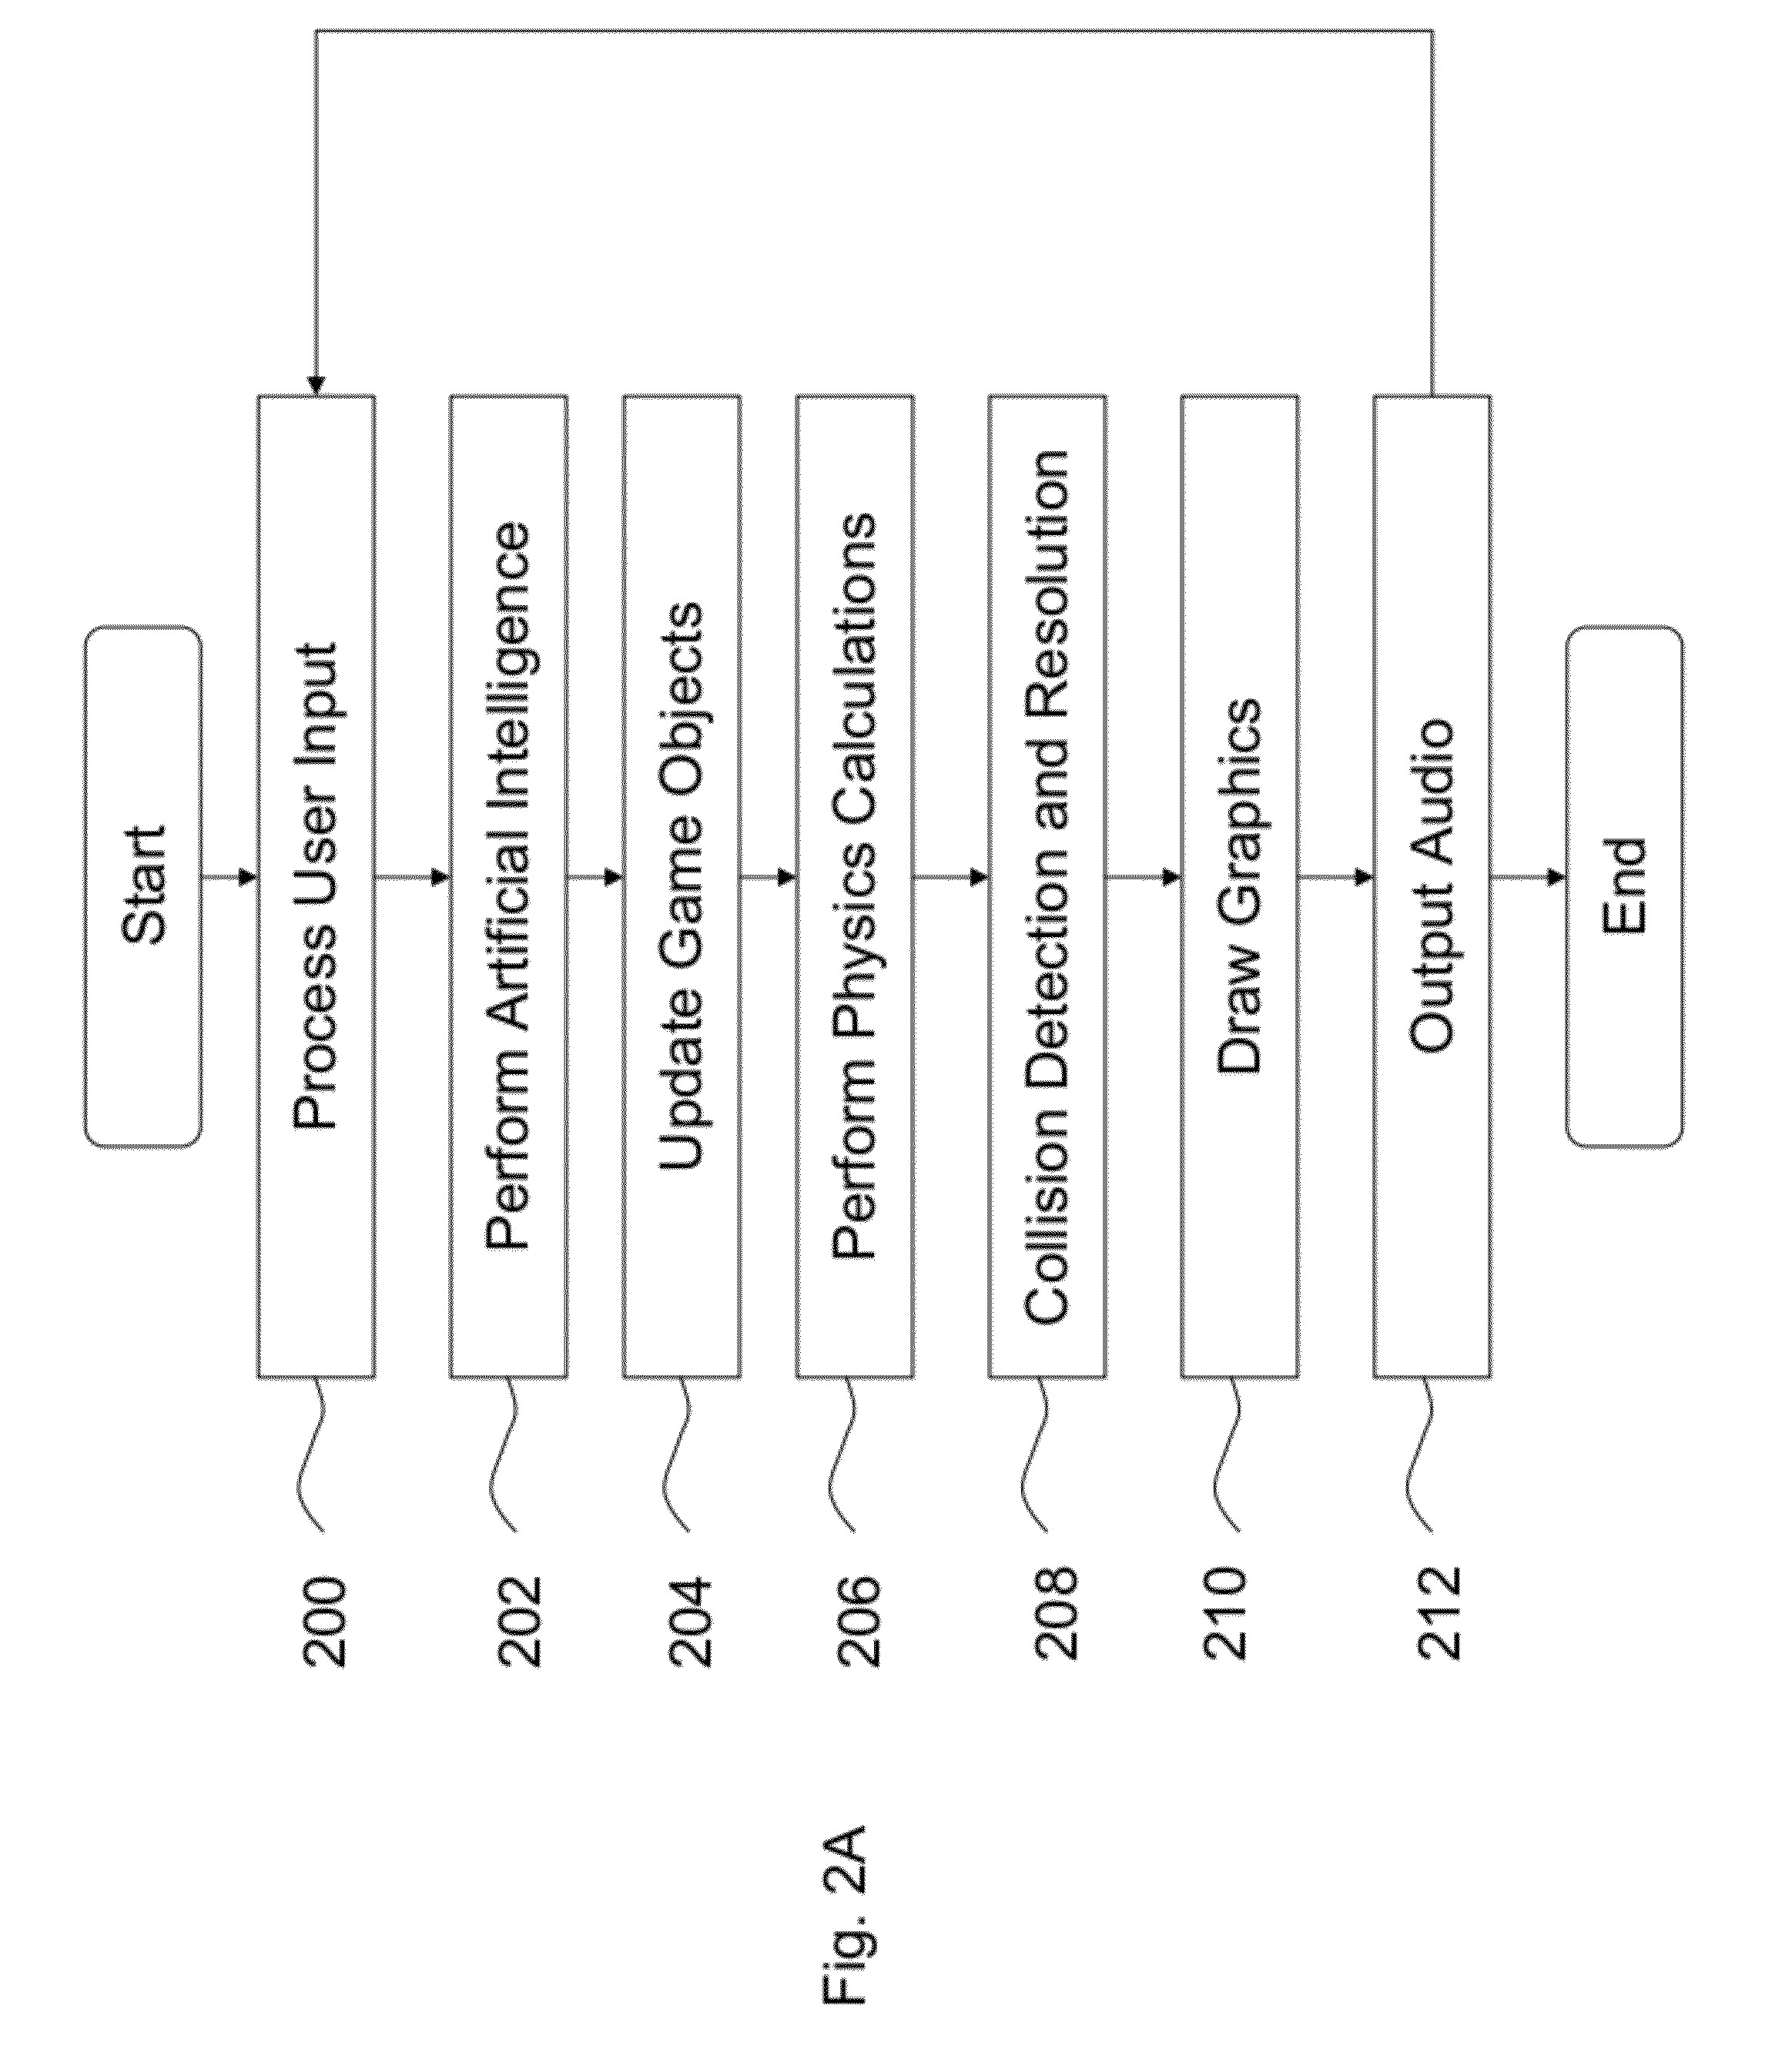 Method and apparatus for visualizing computer program execution